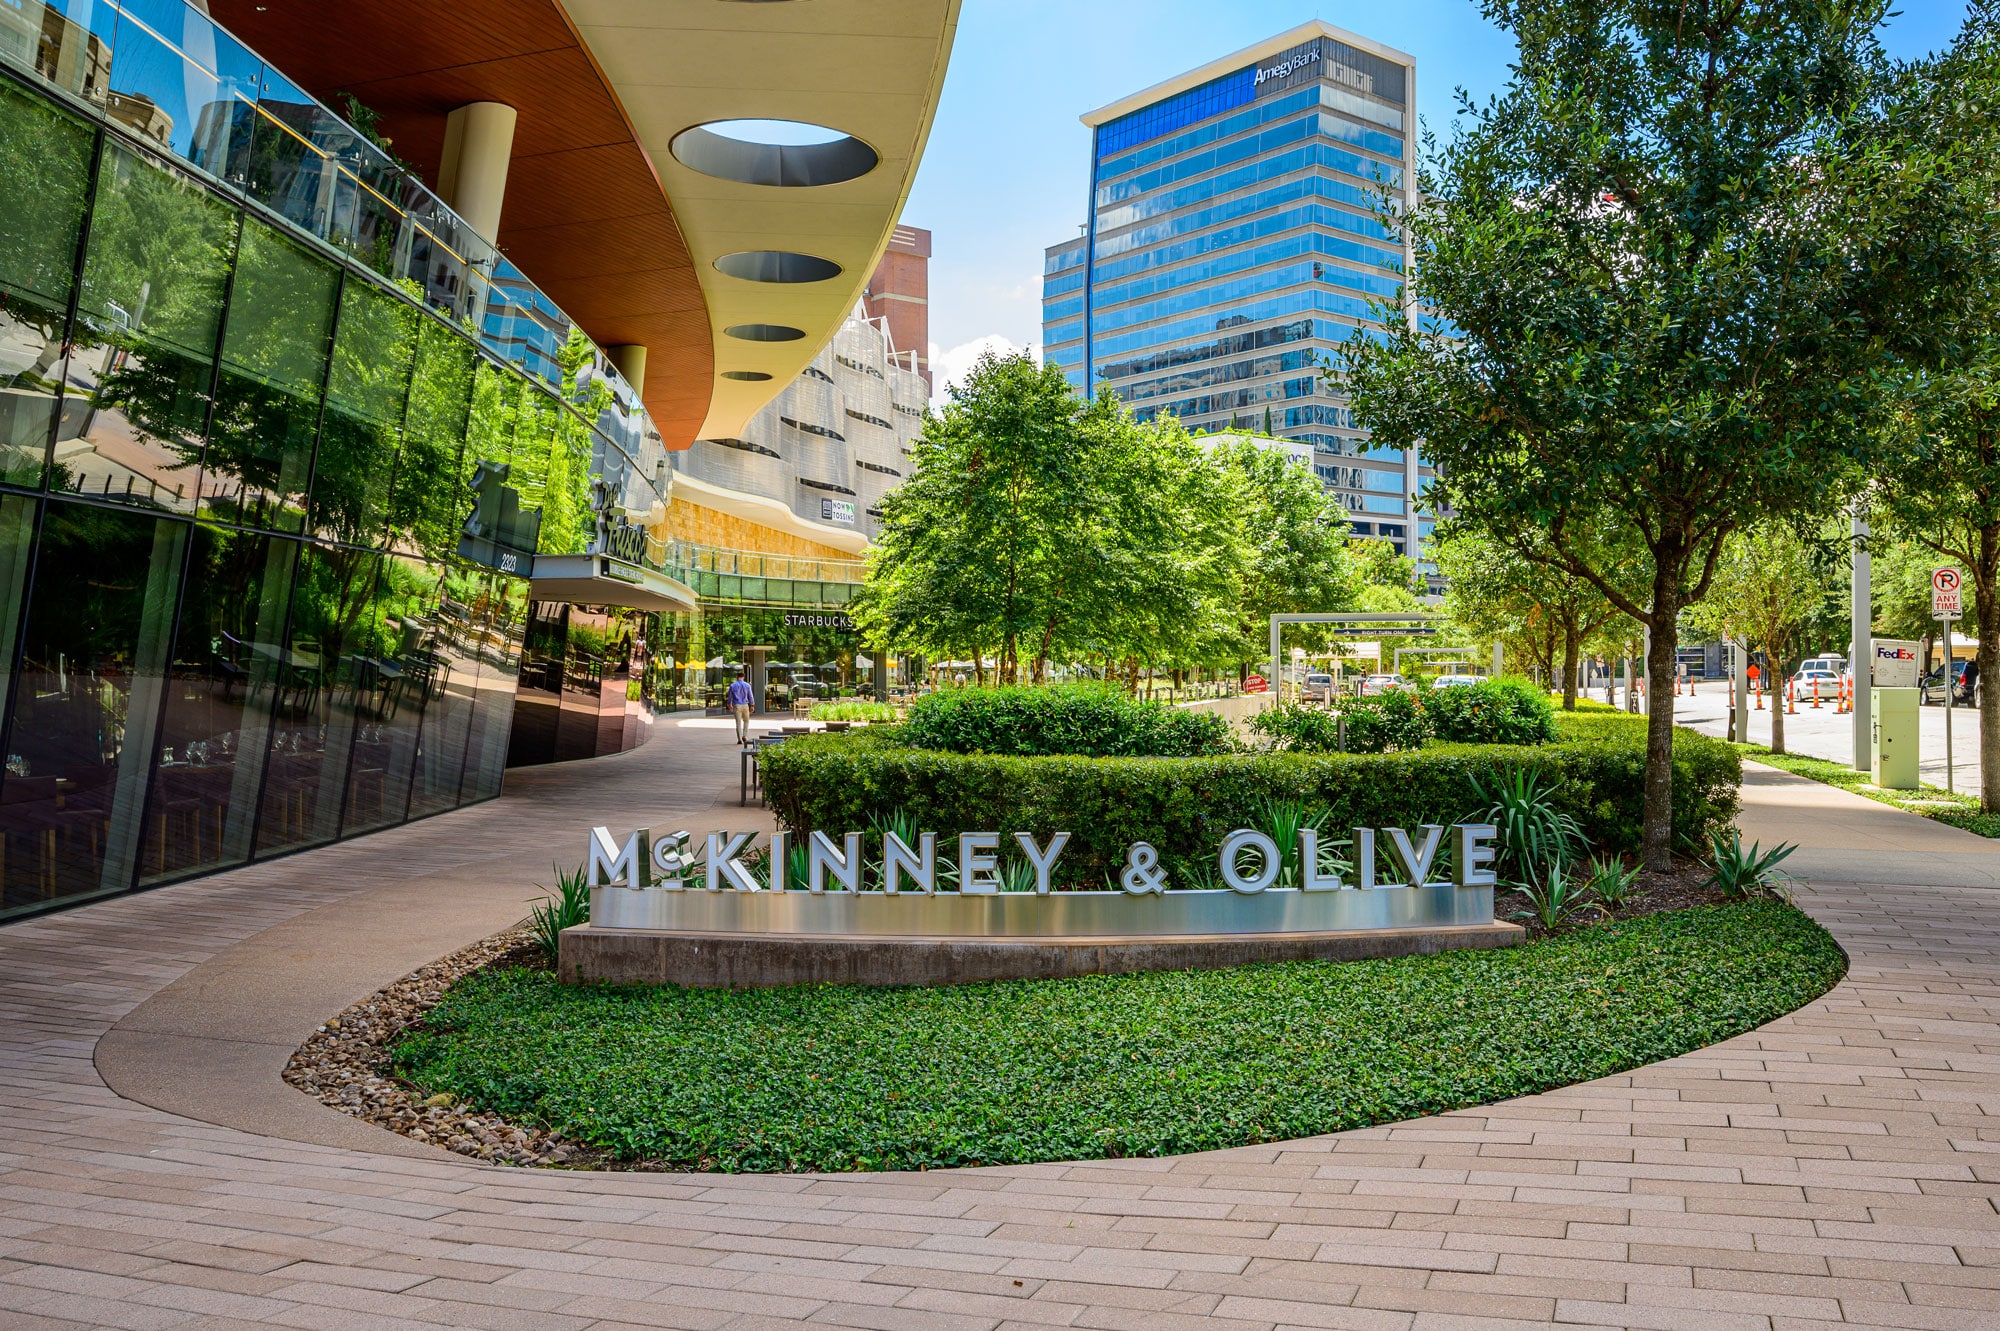 Afternoon photo of McKinney & Olive in downtown Dallas, Texas, with a well-maintained landscape provided by Southern Botanical.